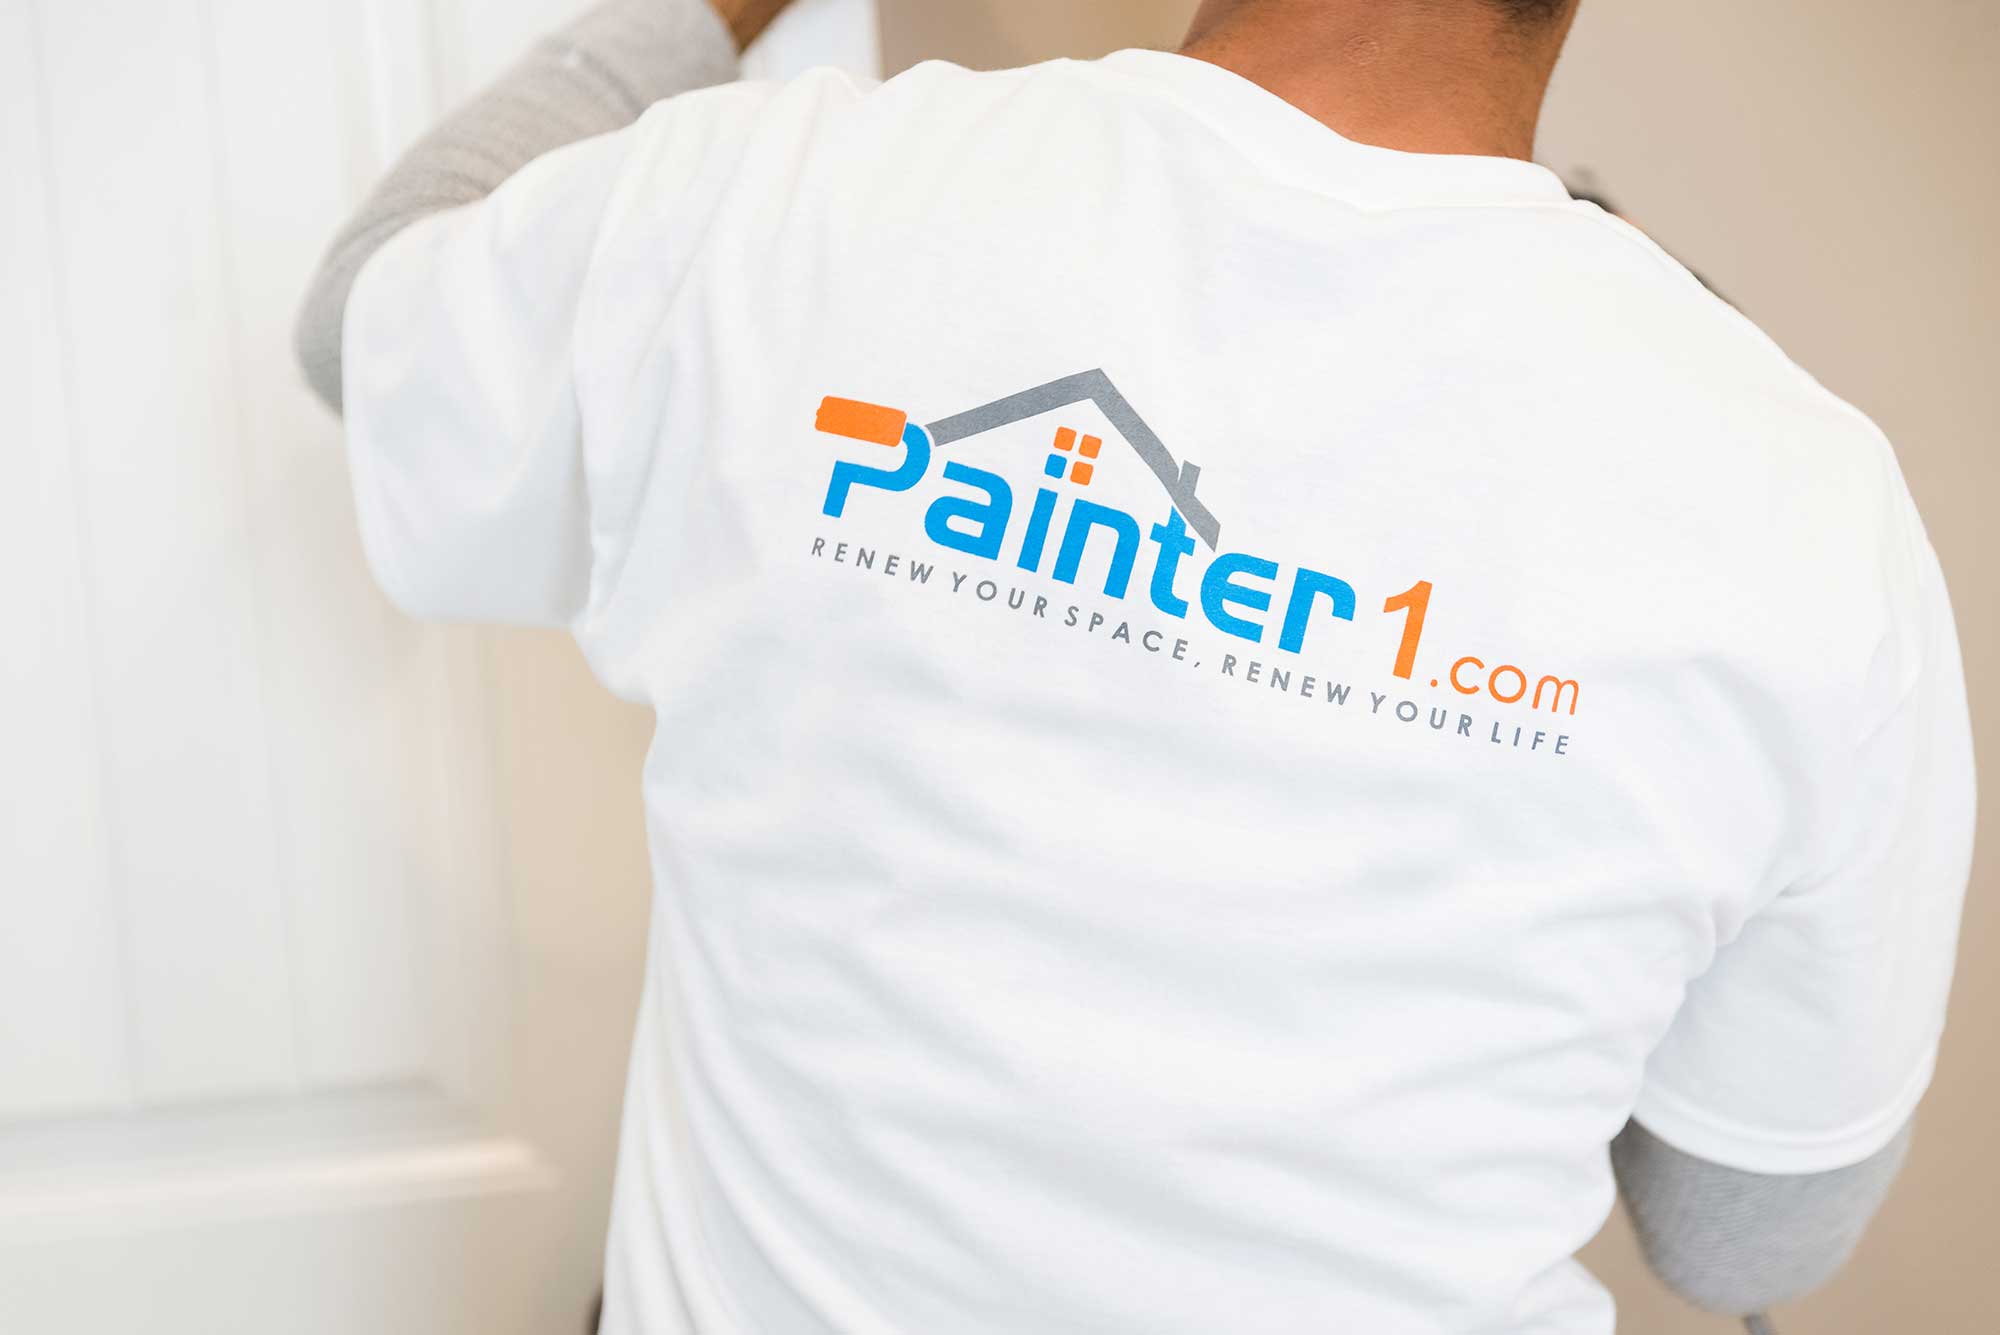 If you are searching for how to remove wallpaper, Painter1 offers professional wallpaper removal near you.